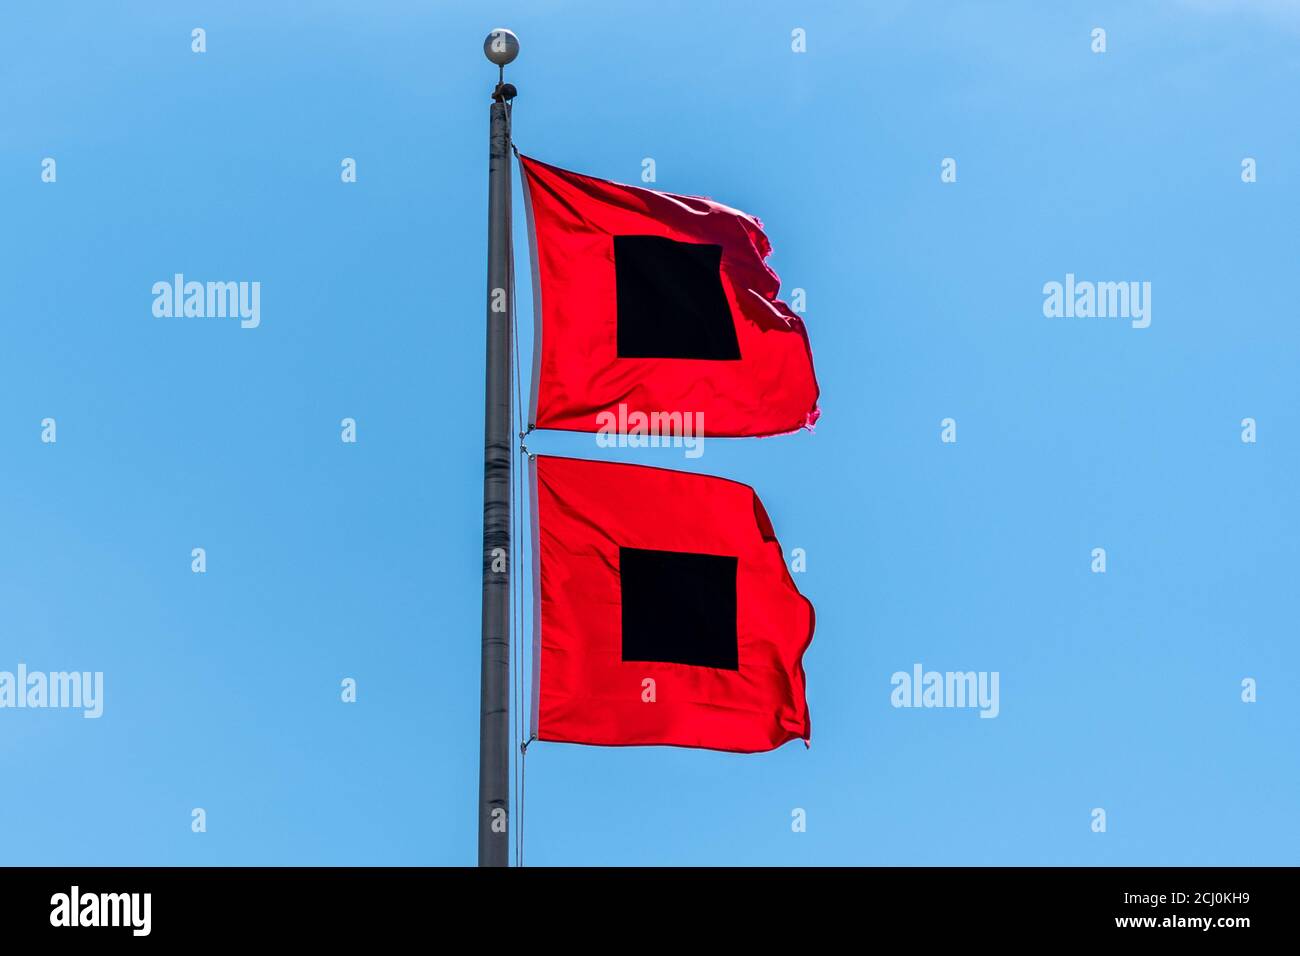 Hurricane warning flags flying in a strong wind. Stock Photo